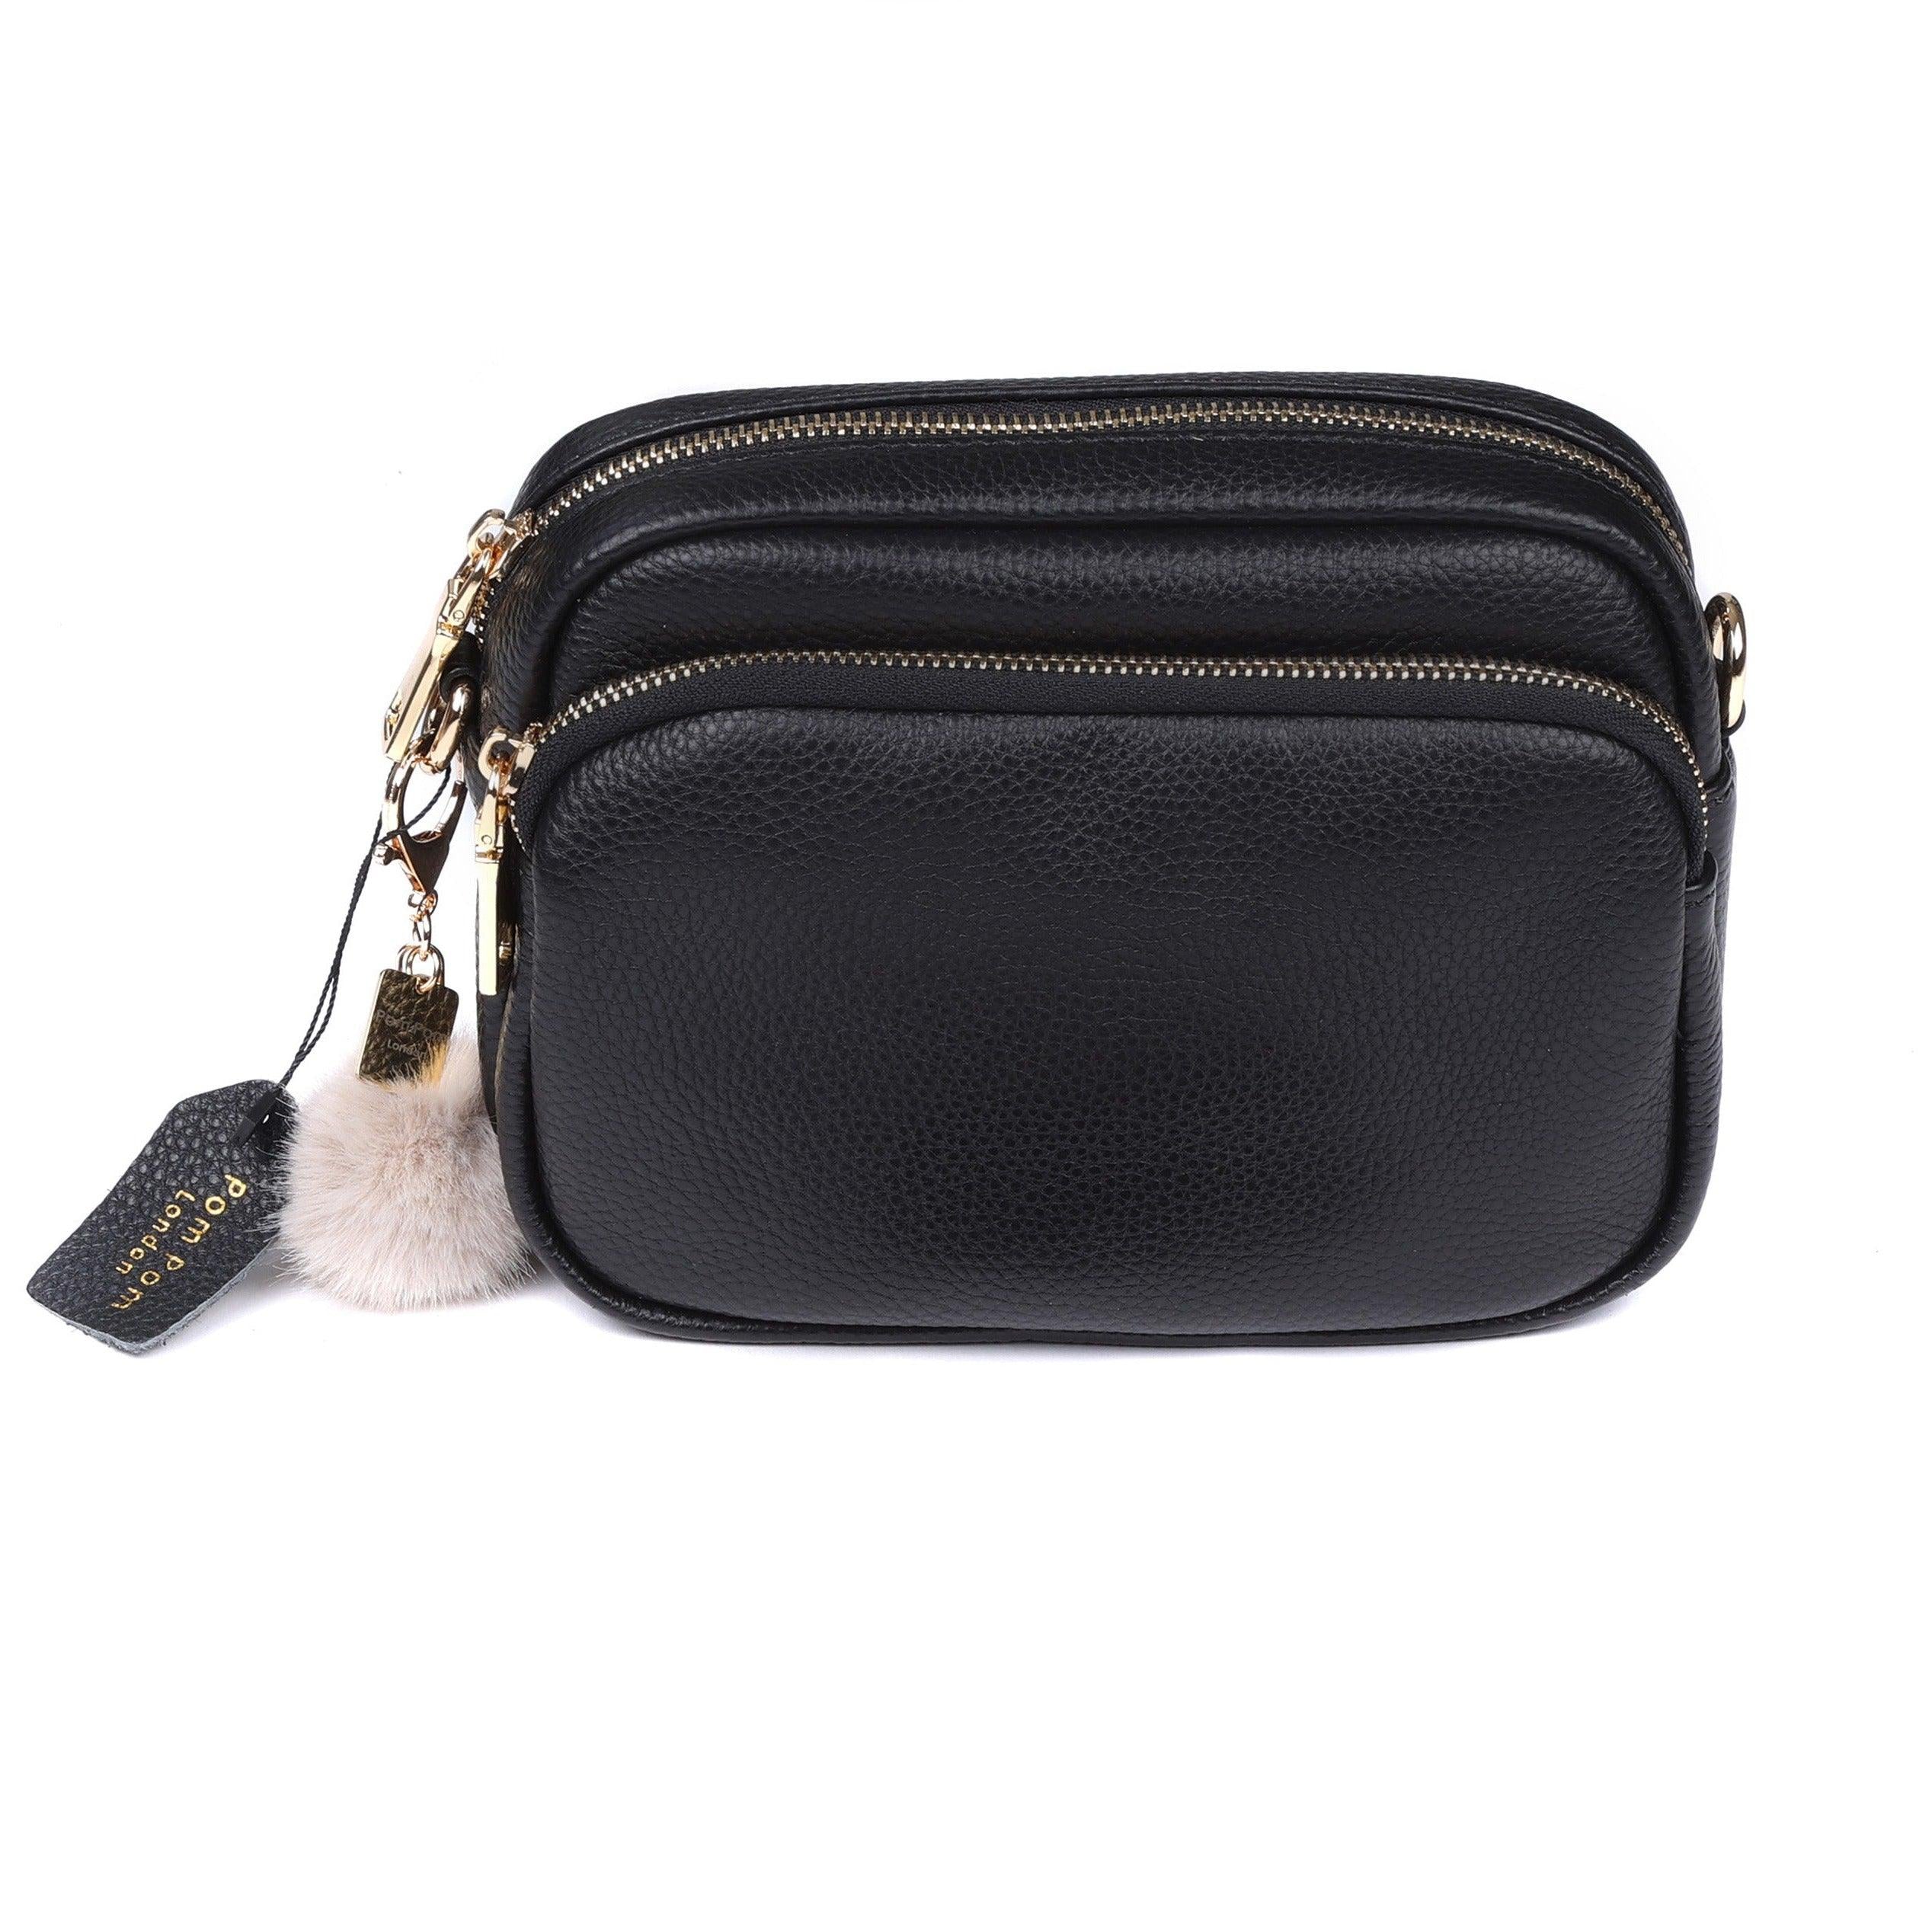 Pom Pom London - Black Greenwich Bag - 100% Leather - 2 Free Straps with Every Order